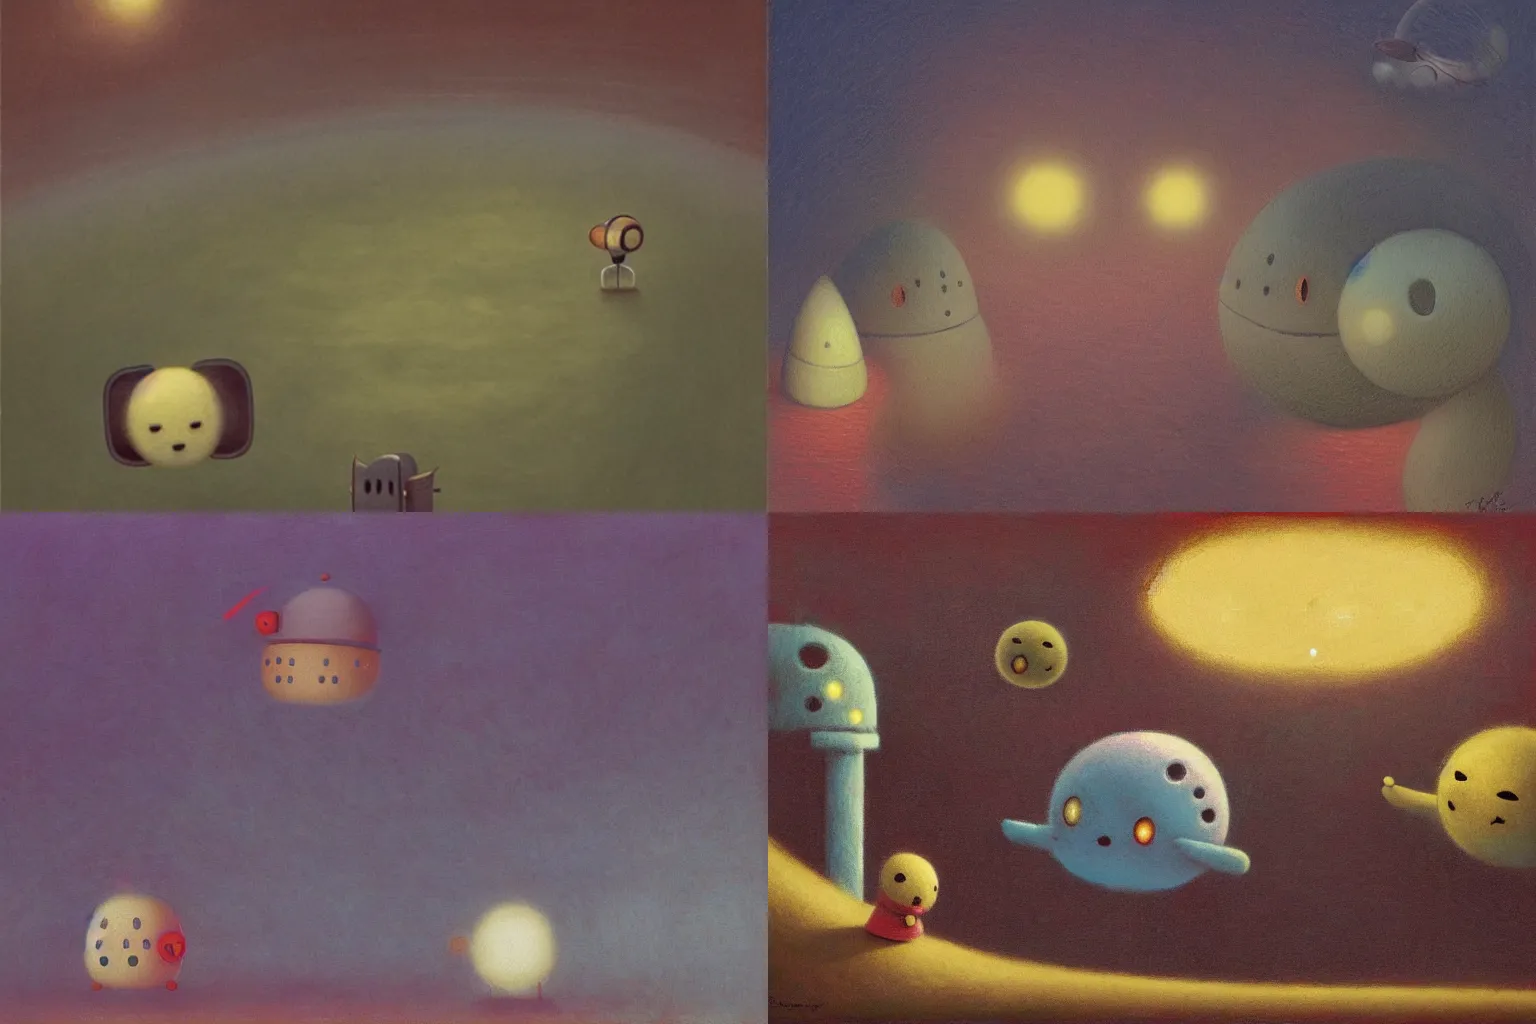 Prompt: kirby's dreamland by shaun tan